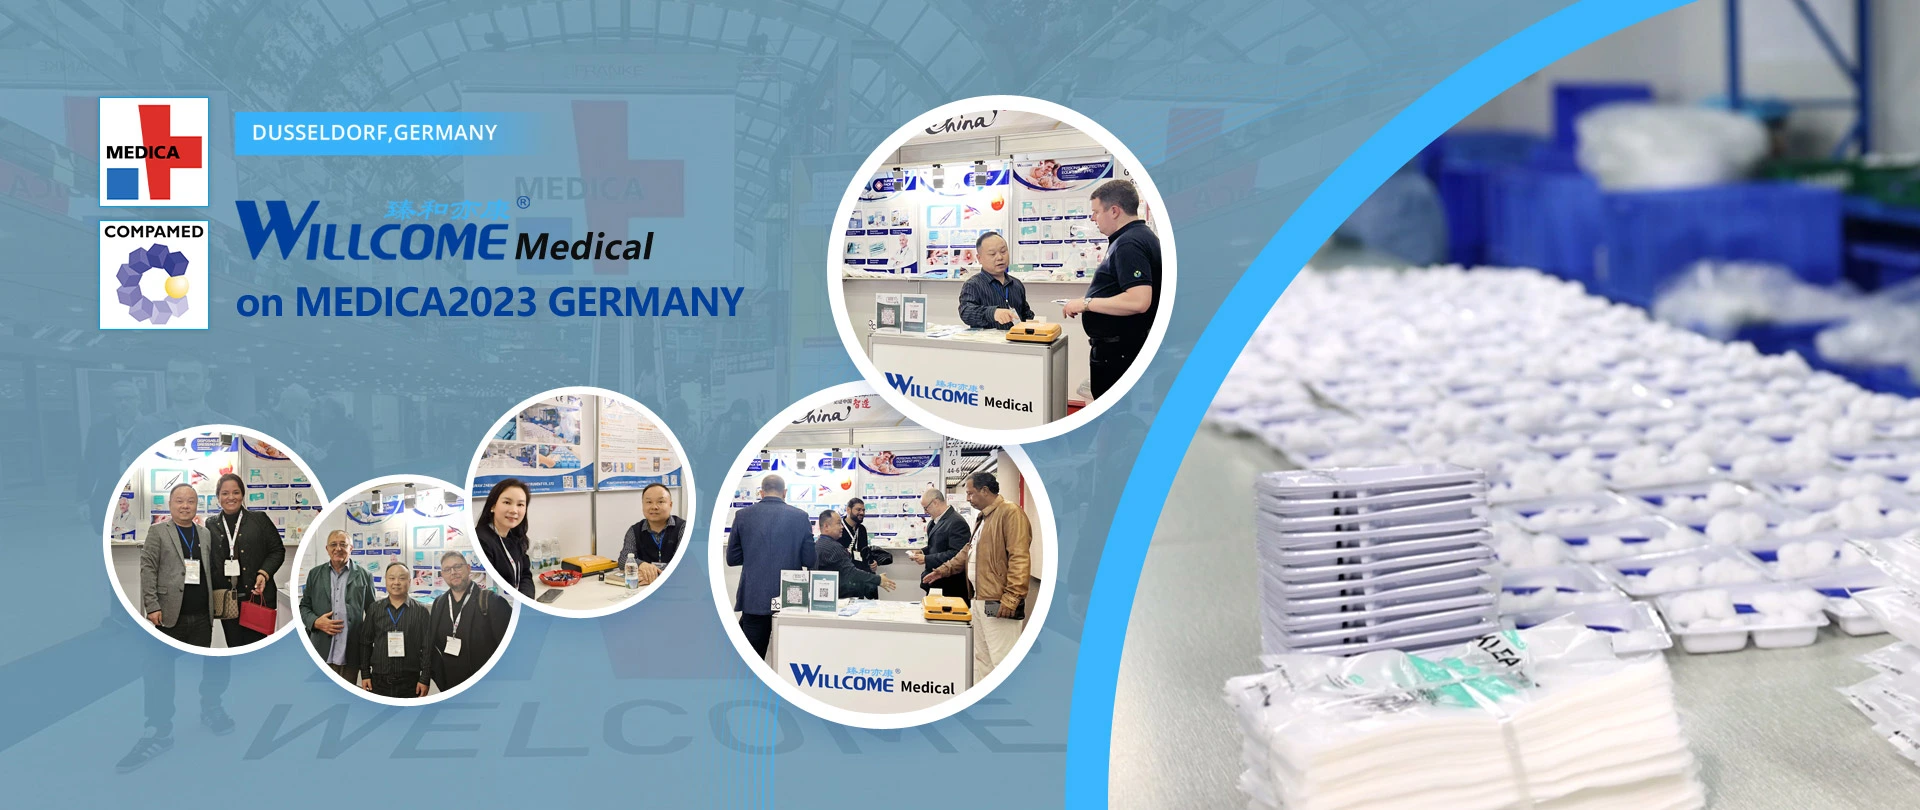 WELCOME TO B2B TRADE FAIR FOR MEDICAL SUPPLIES